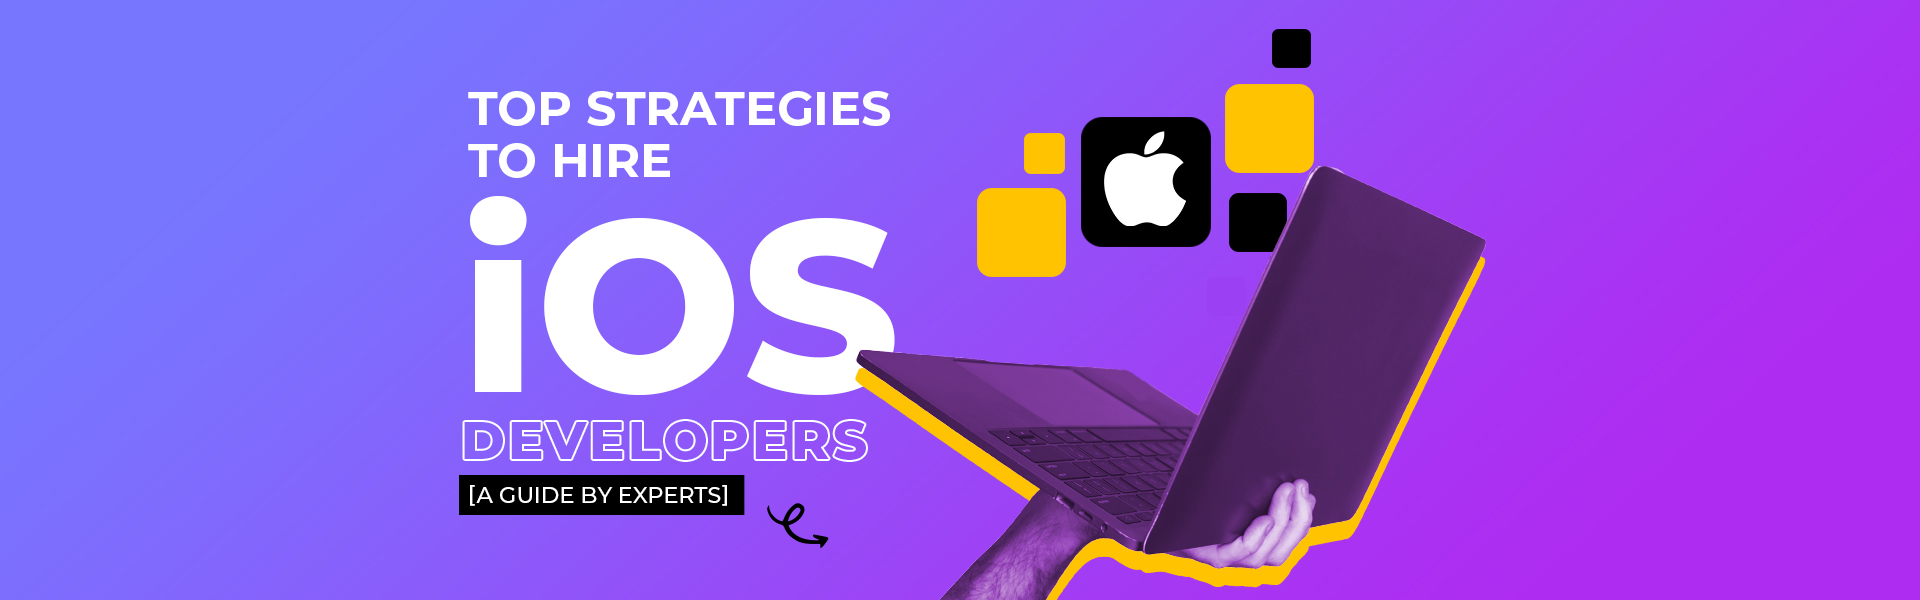 CC-Blog_Top-Strategies-to-Hire-iOS-Developers_main-banner